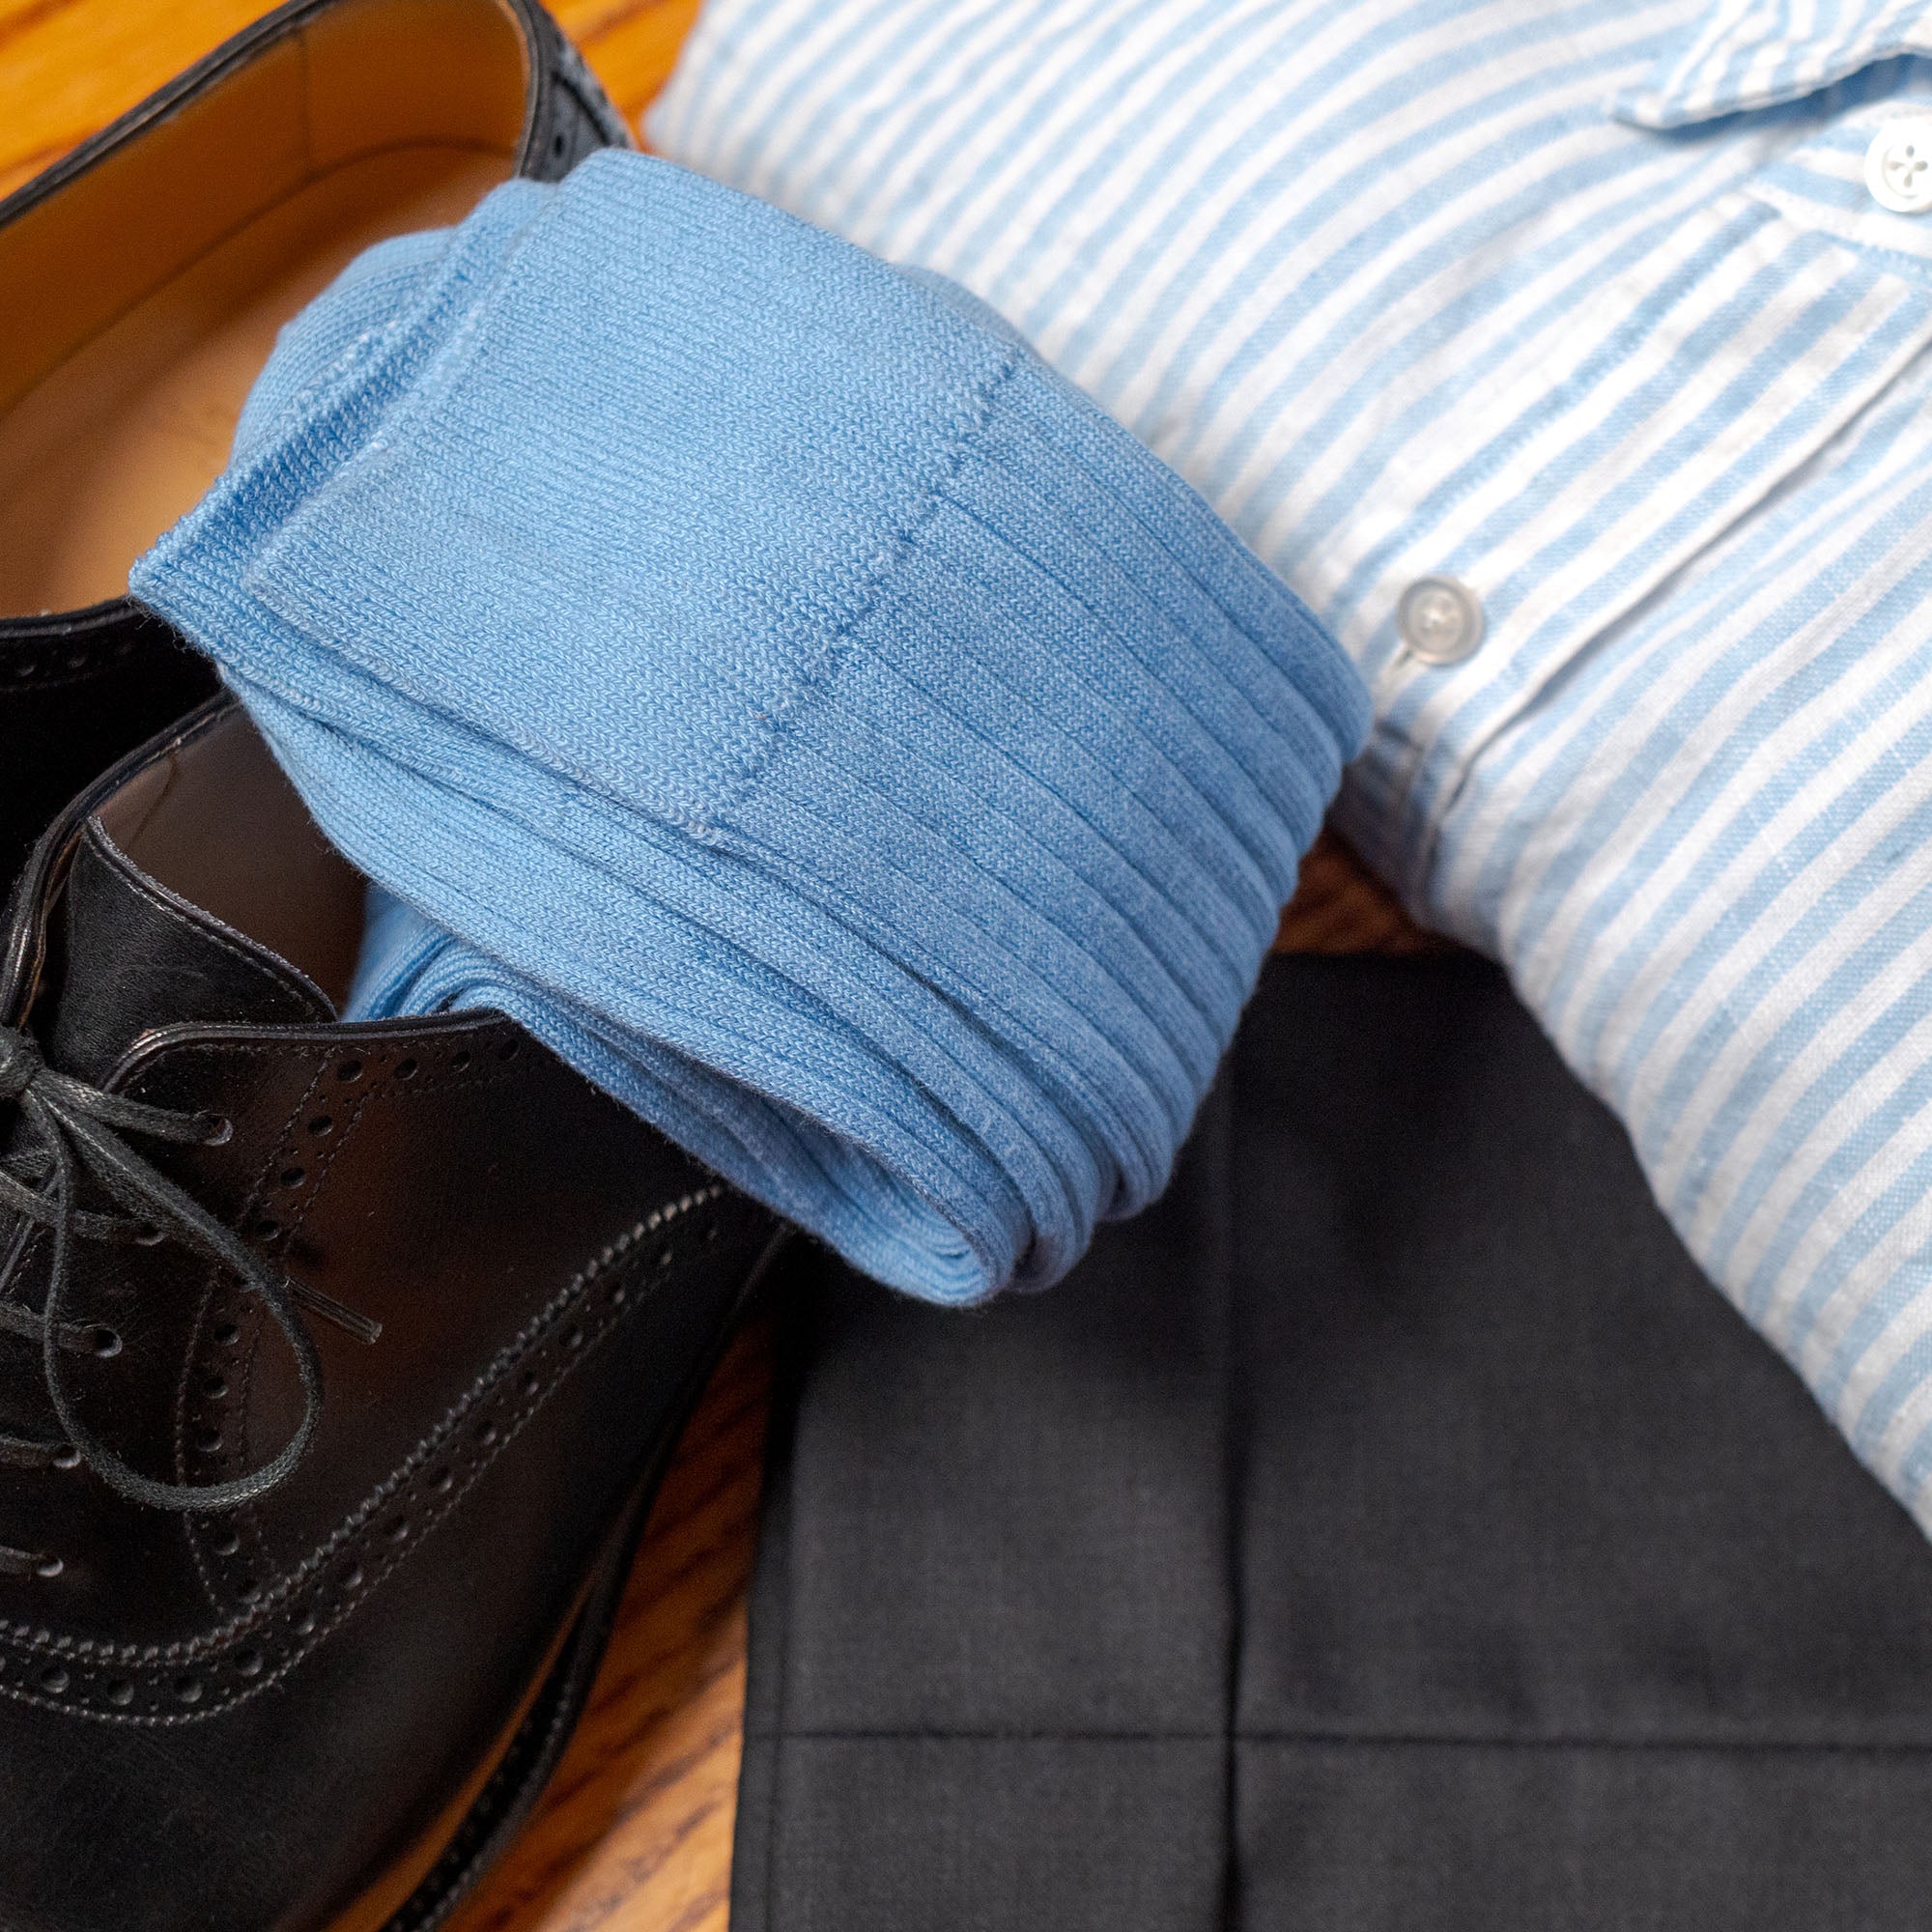 light blue ribbed dress socks with black oxfords and business casual attire